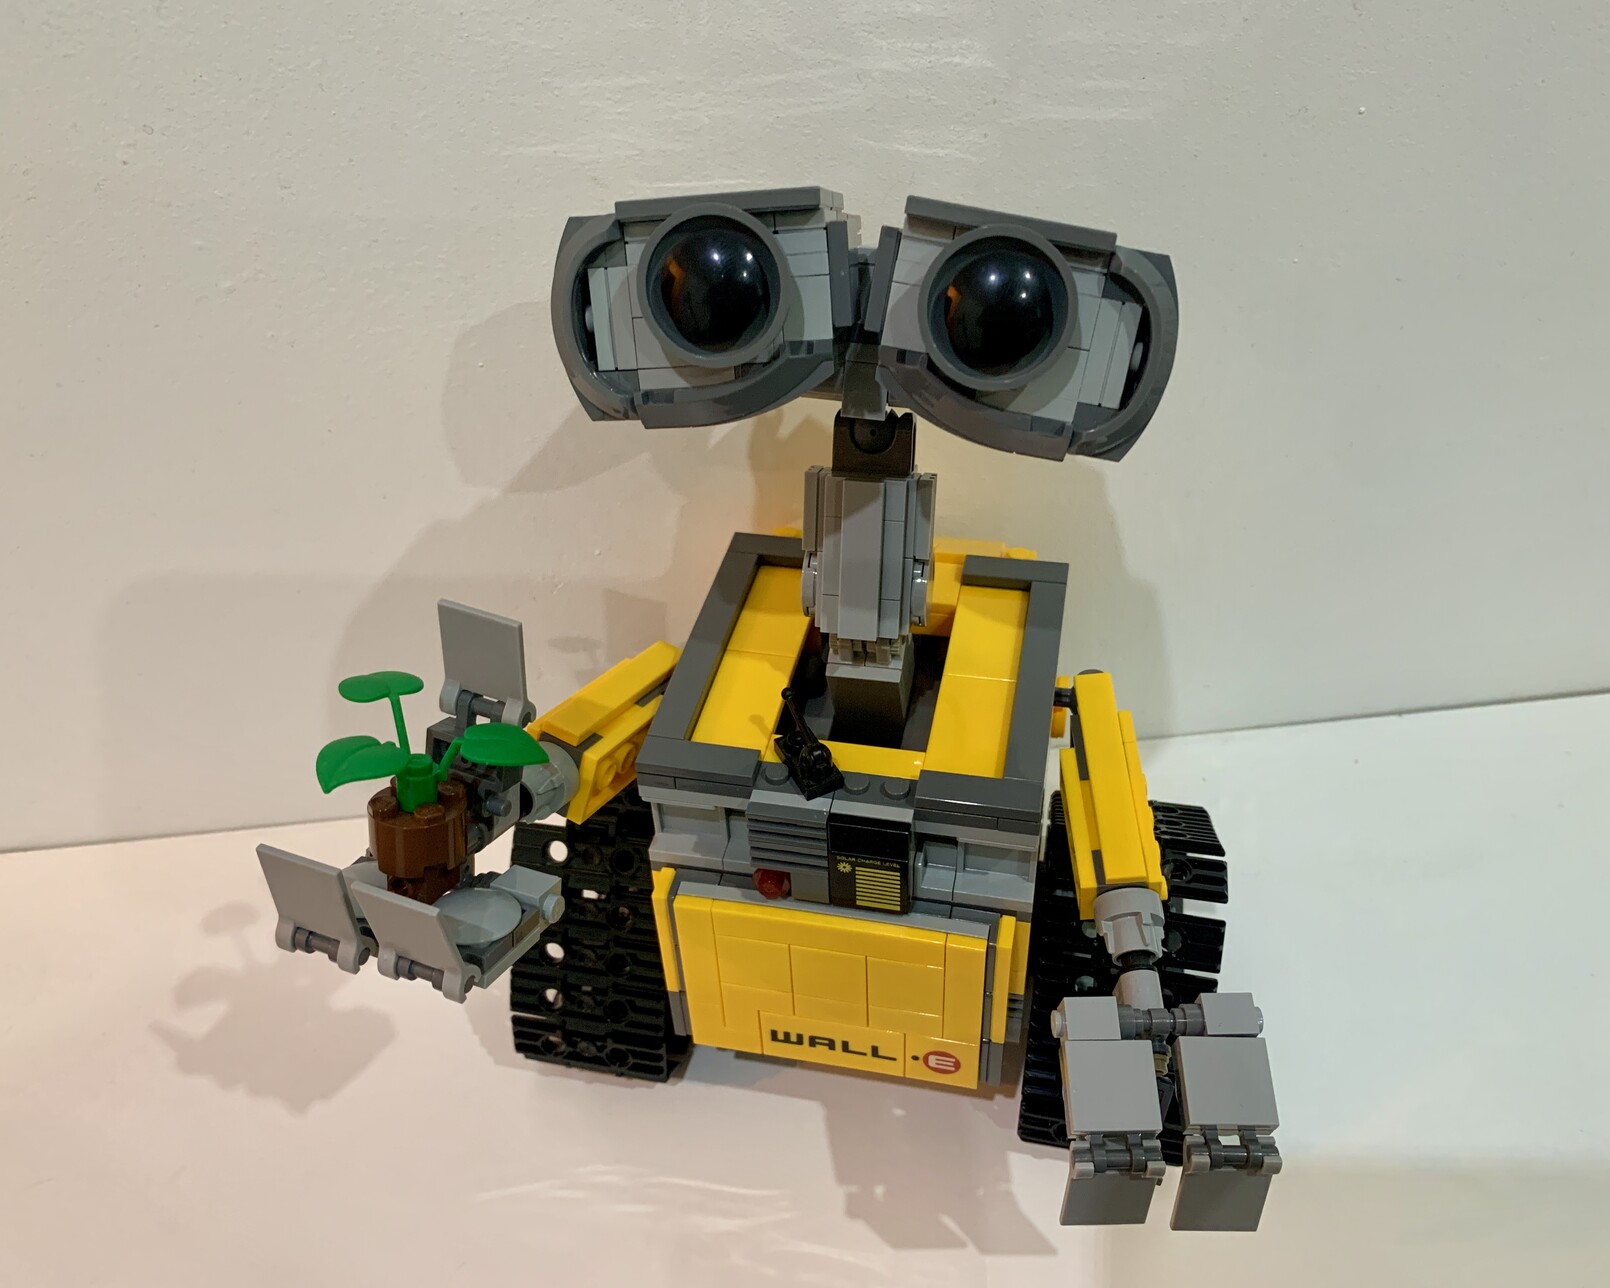 Built Lego WallÂ·E robot from the Pixar film looking at the camera and holding a plant in his right hand.